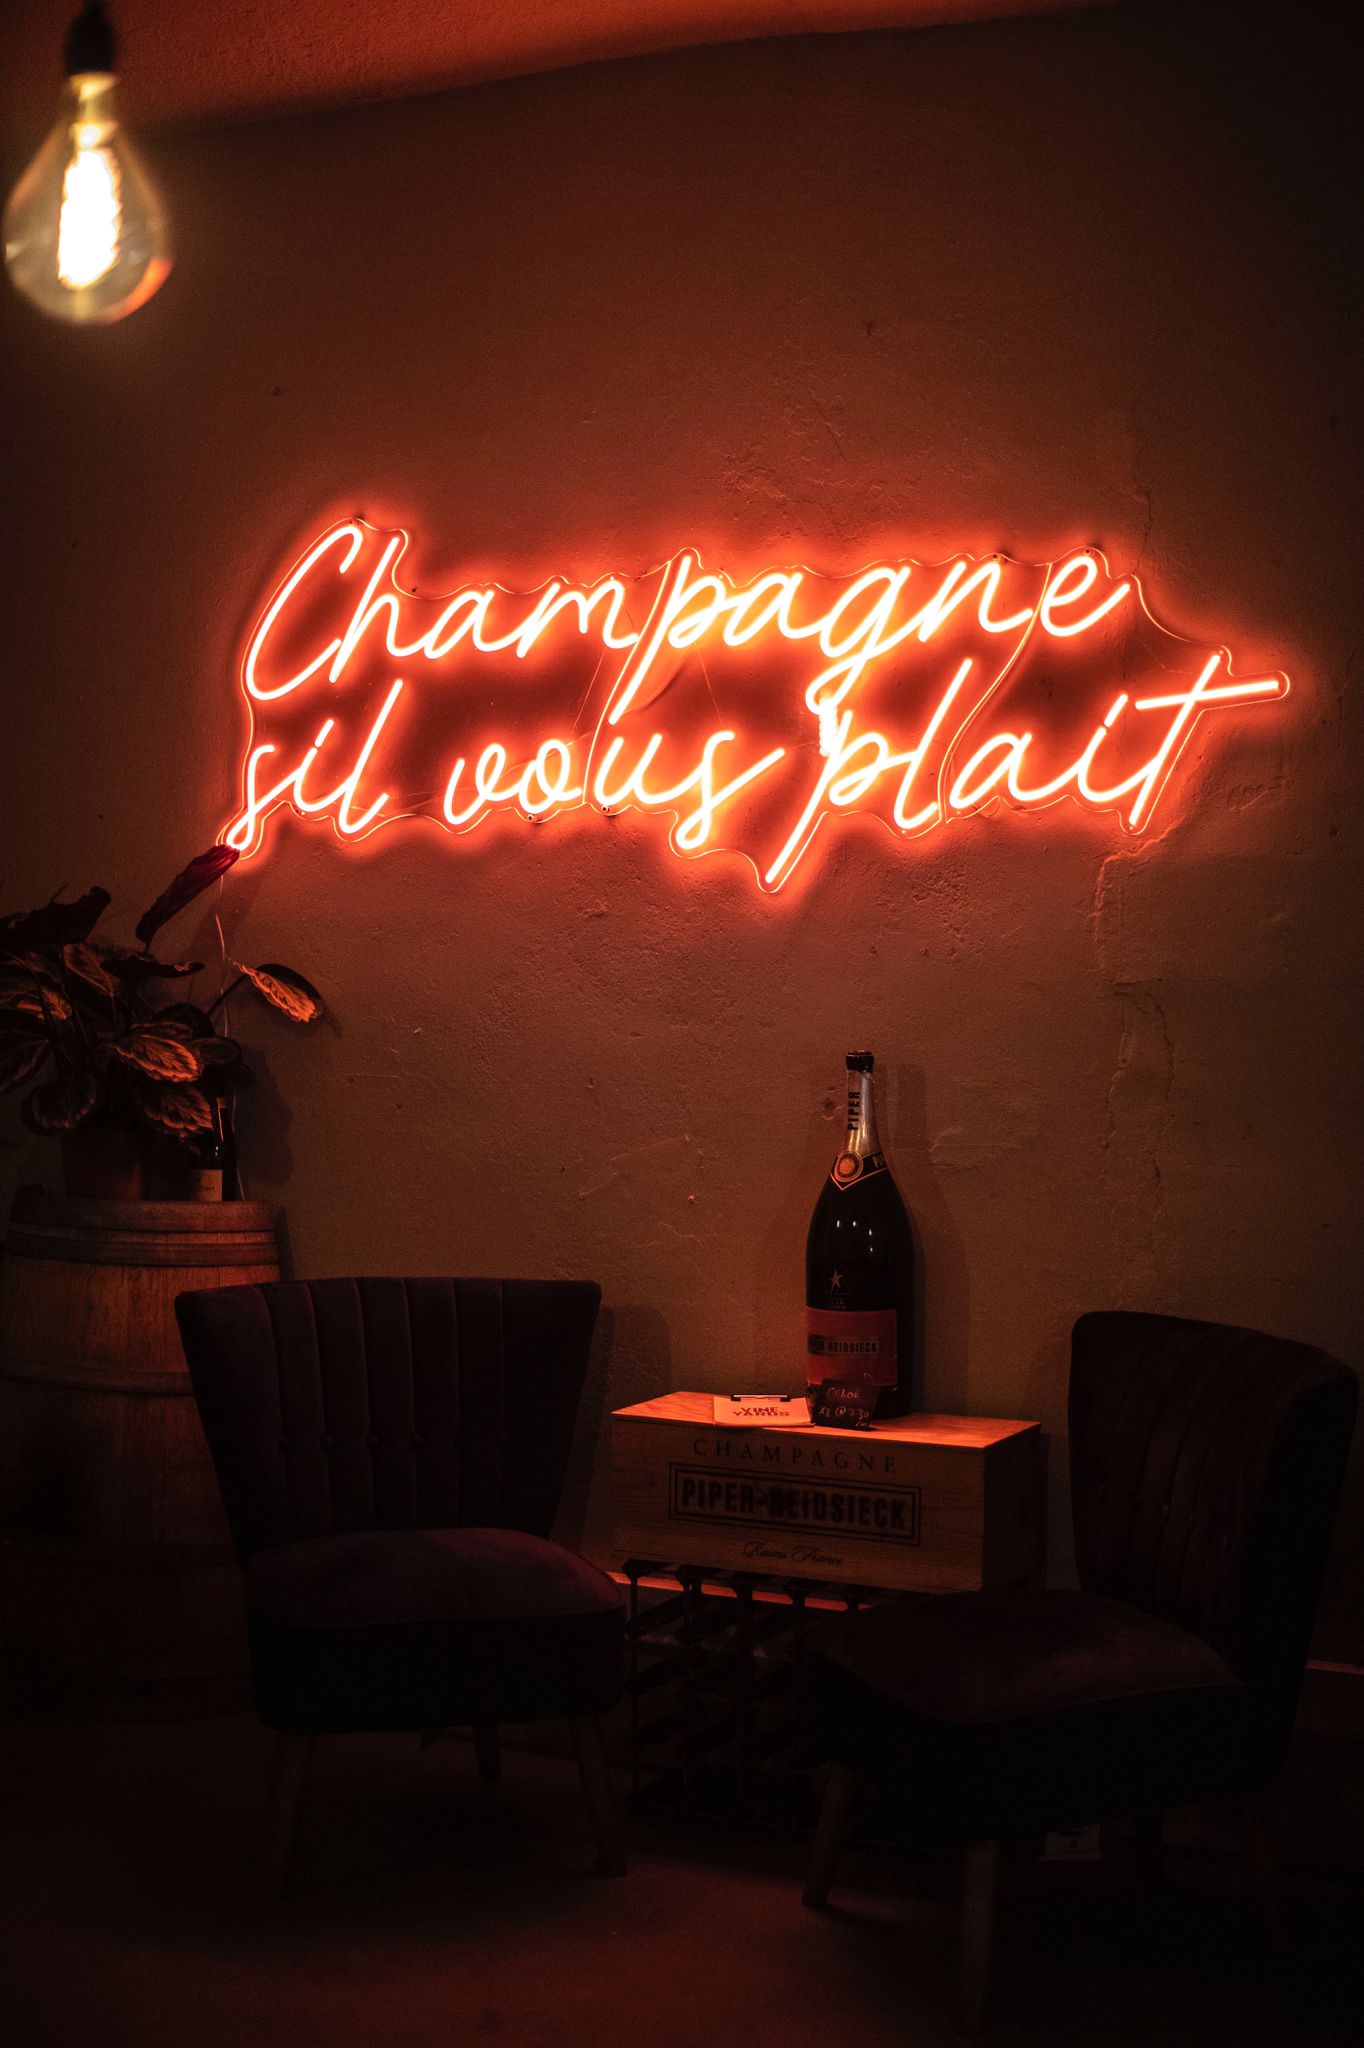 NEON SIGN THAT READS. 'CHAMPAGNE SIL VOUS PLAIT'